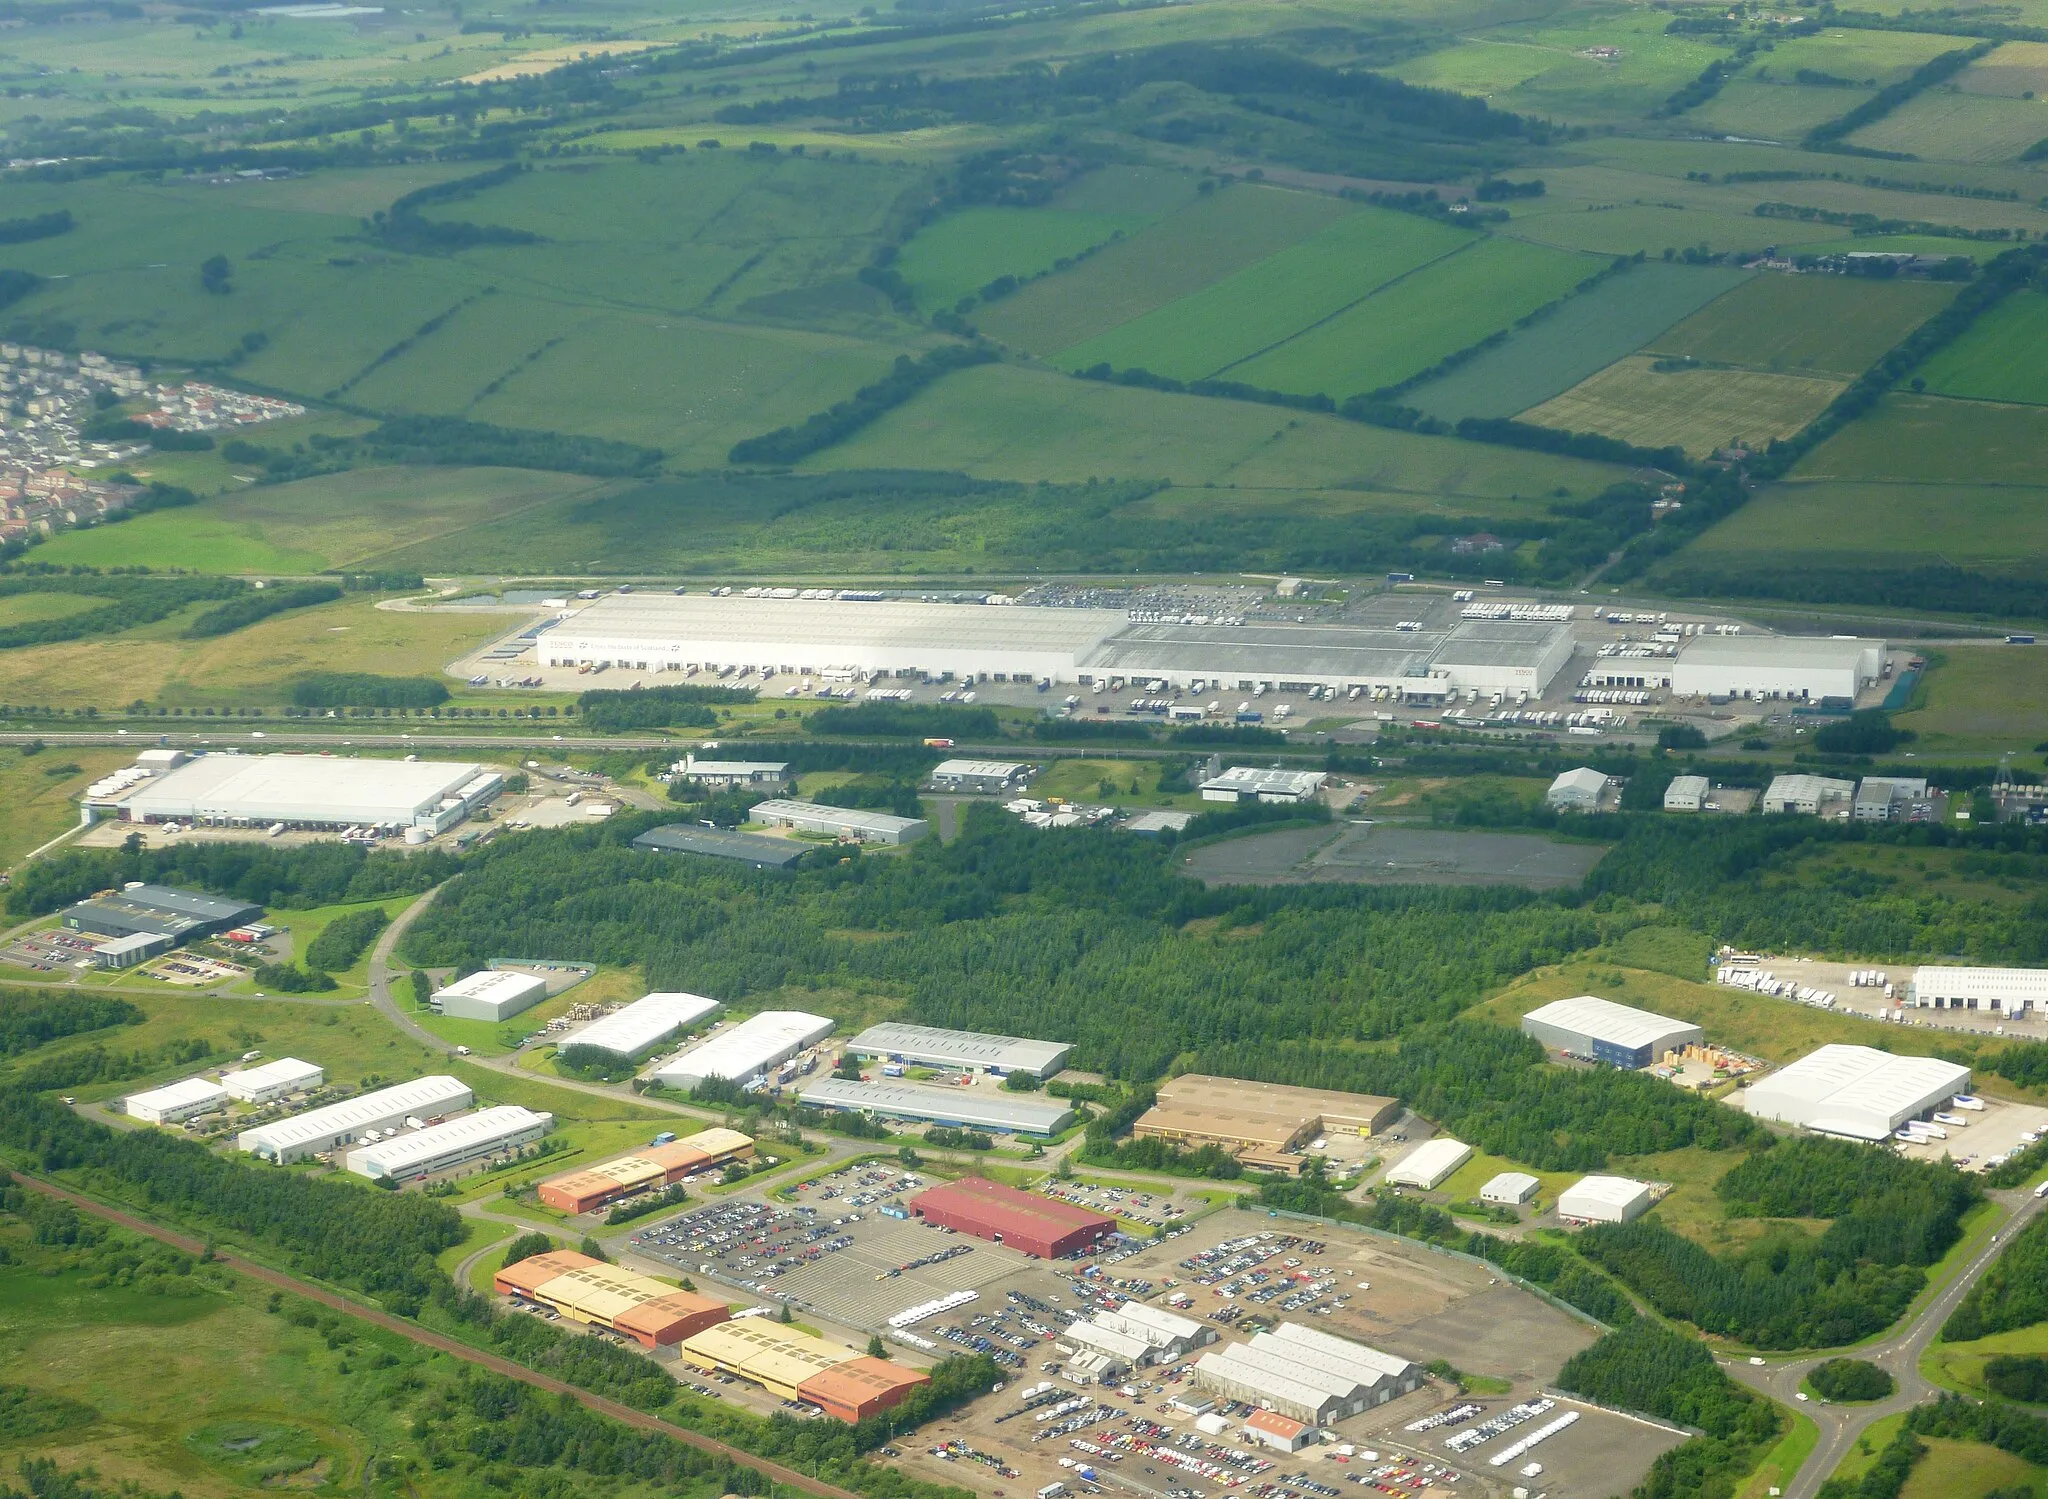 Photo showing: Tesco's Distribution Centre in Livingston (the long white building) opened in 2007, supplying all the company's stores in Scotland and Northern Ireland. It covers an area of one million square feet. The road haulage company Stobart transports goods from the centre to the Grangemouth rail terminal, whence they are sent on by rail to Inverness for distribution throughout the north of Scotland.